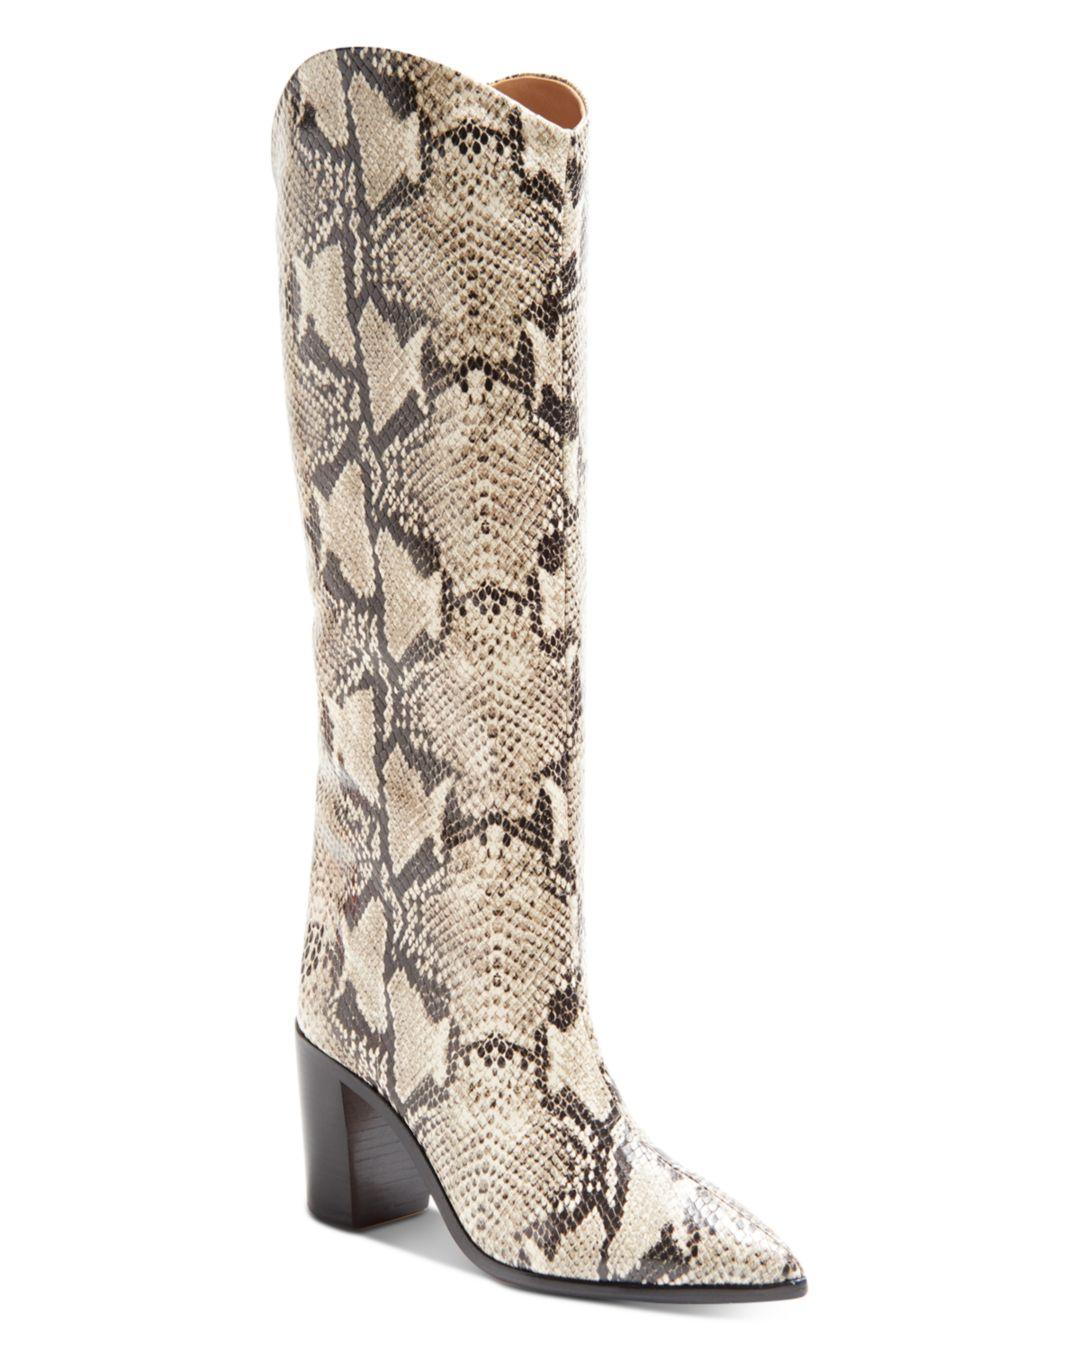 Schutz Leather Women's Analeah Croc - Embossed Pointed - Toe Tall Boots ...